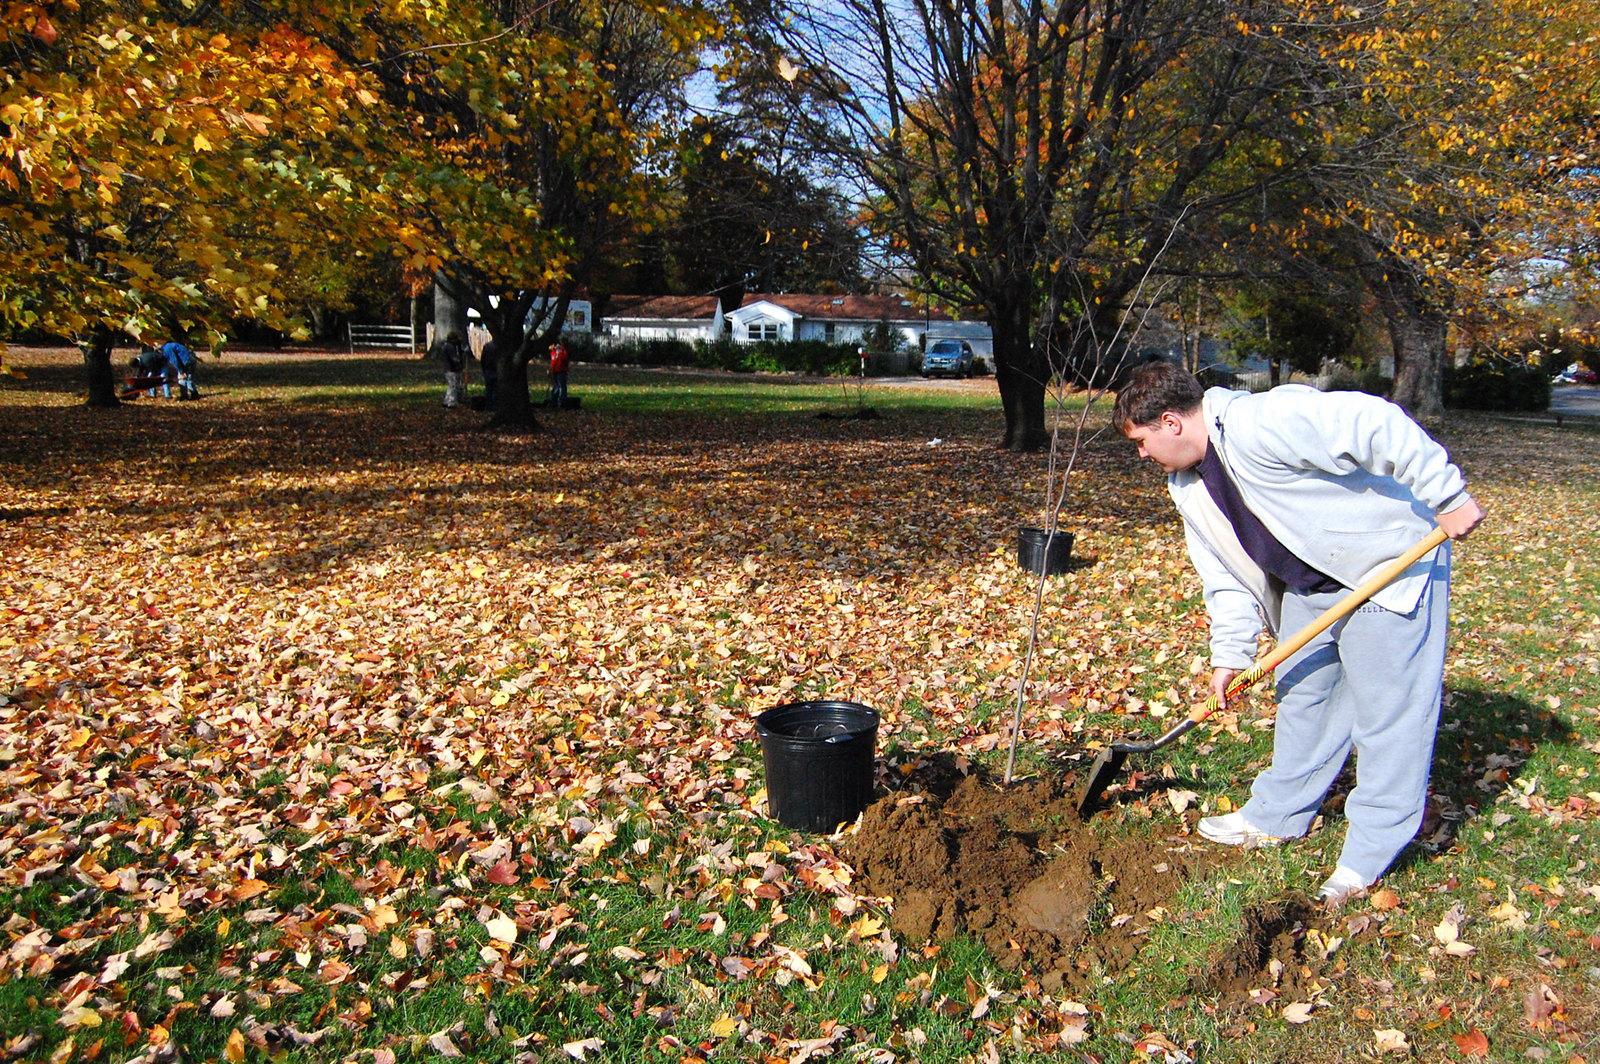 Volunteer digging a hole to plant a tree during fall, leaves covering the ground. 